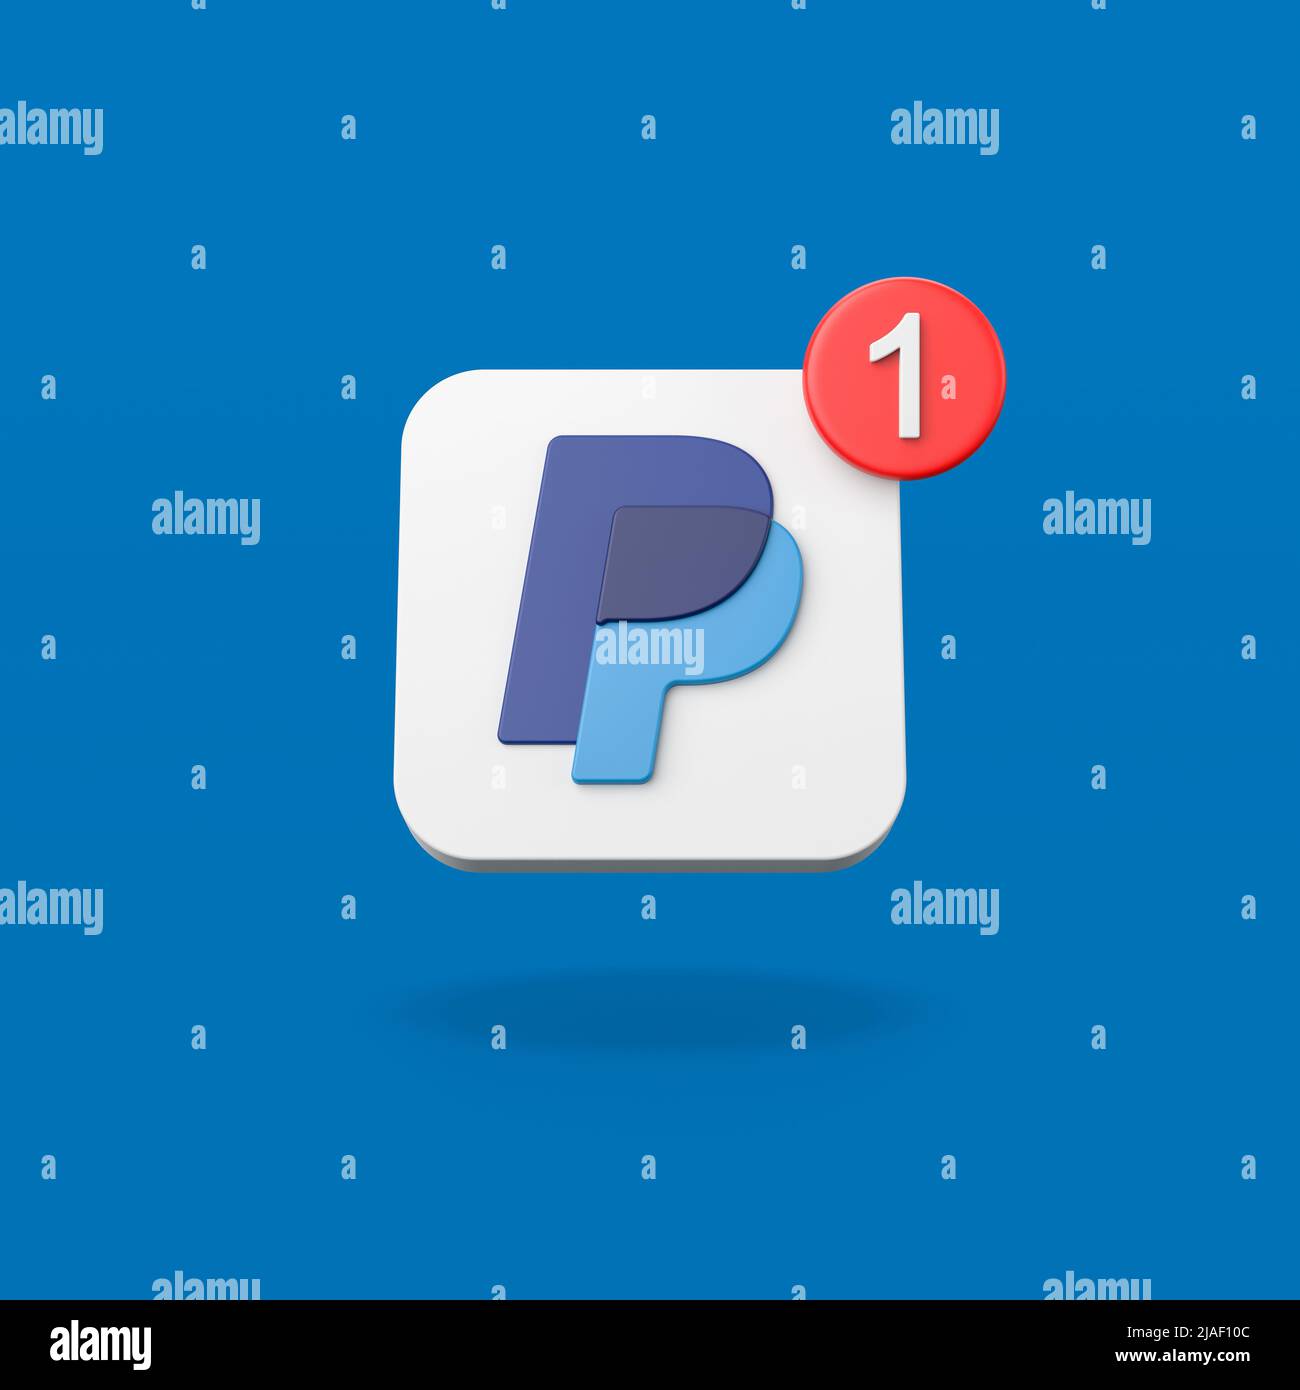 Paypal Logo with 1 Notification on Blue Background Stock Photo